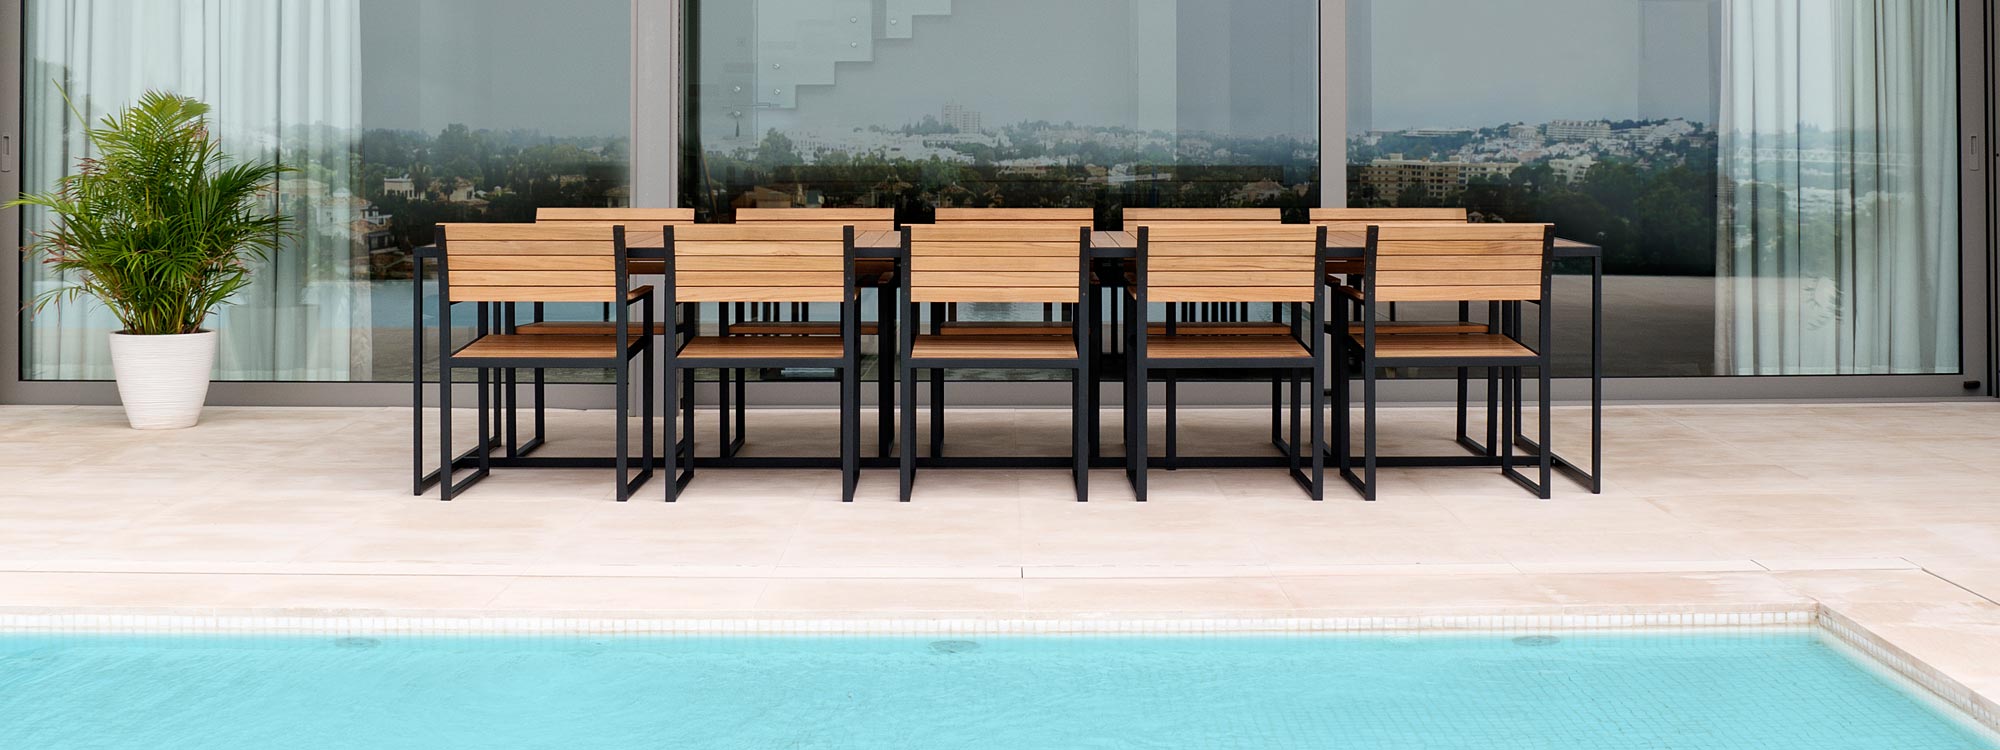 Image of Roshults Garden Bistro large dining table and chairs on poolside, with floor to ceiling sliding glass doors in the background